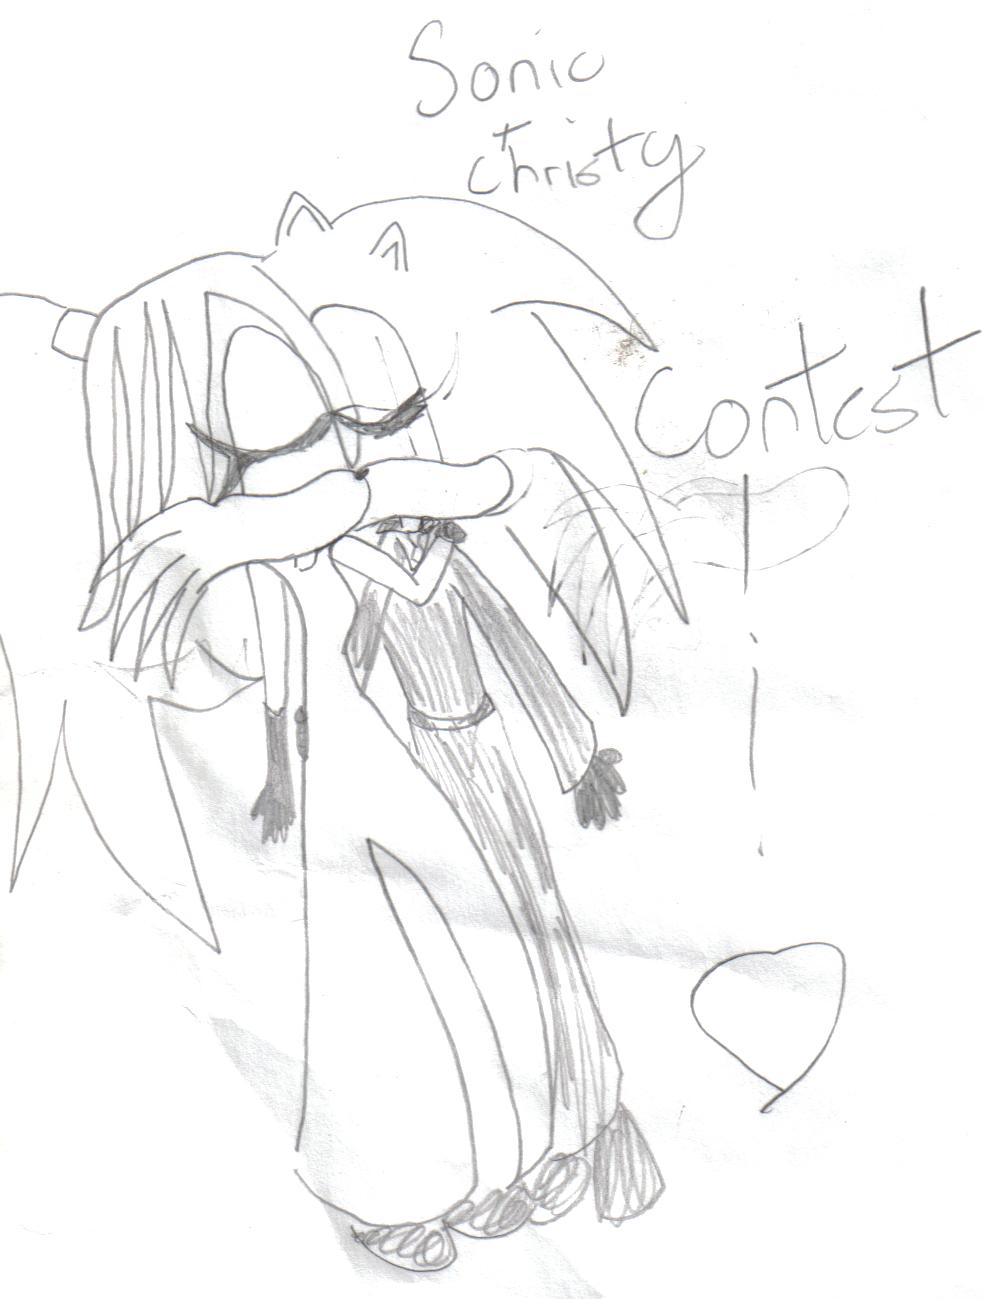 Sonic+Christy Contest by Tilias